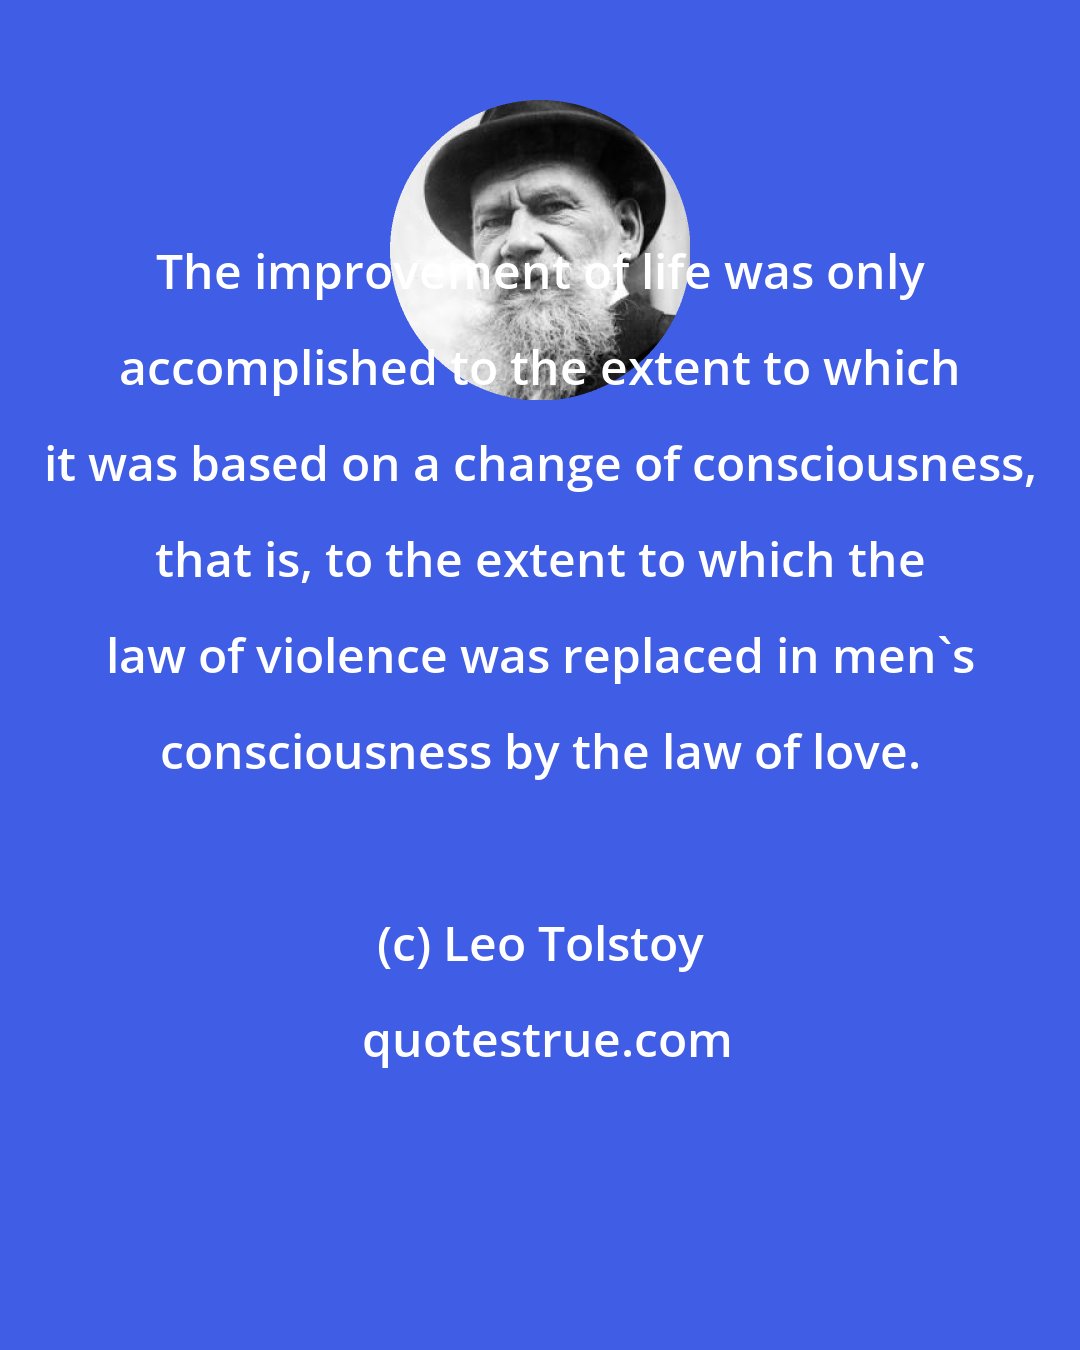 Leo Tolstoy: The improvement of life was only accomplished to the extent to which it was based on a change of consciousness, that is, to the extent to which the law of violence was replaced in men's consciousness by the law of love.